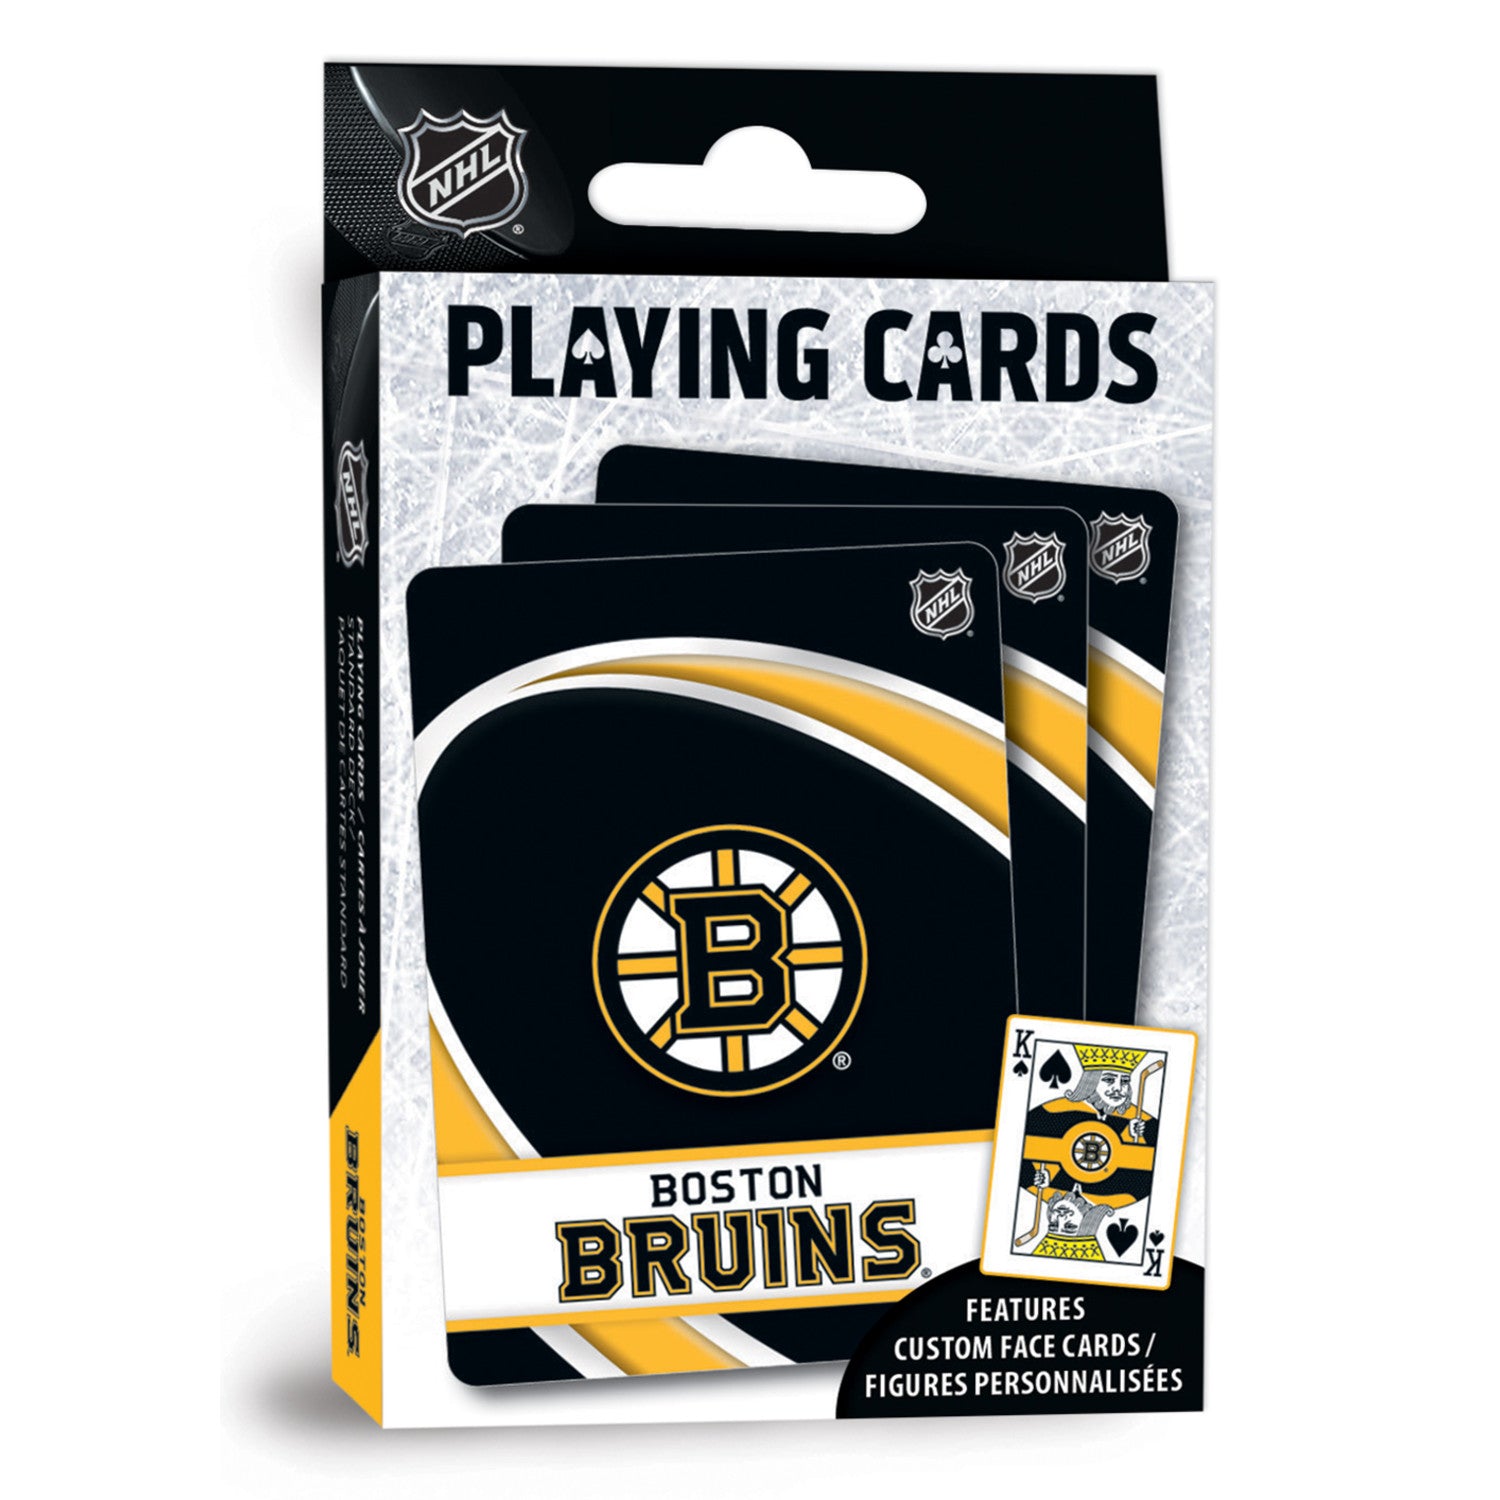 Boston Bruins Playing Cards - 54 Card Deck